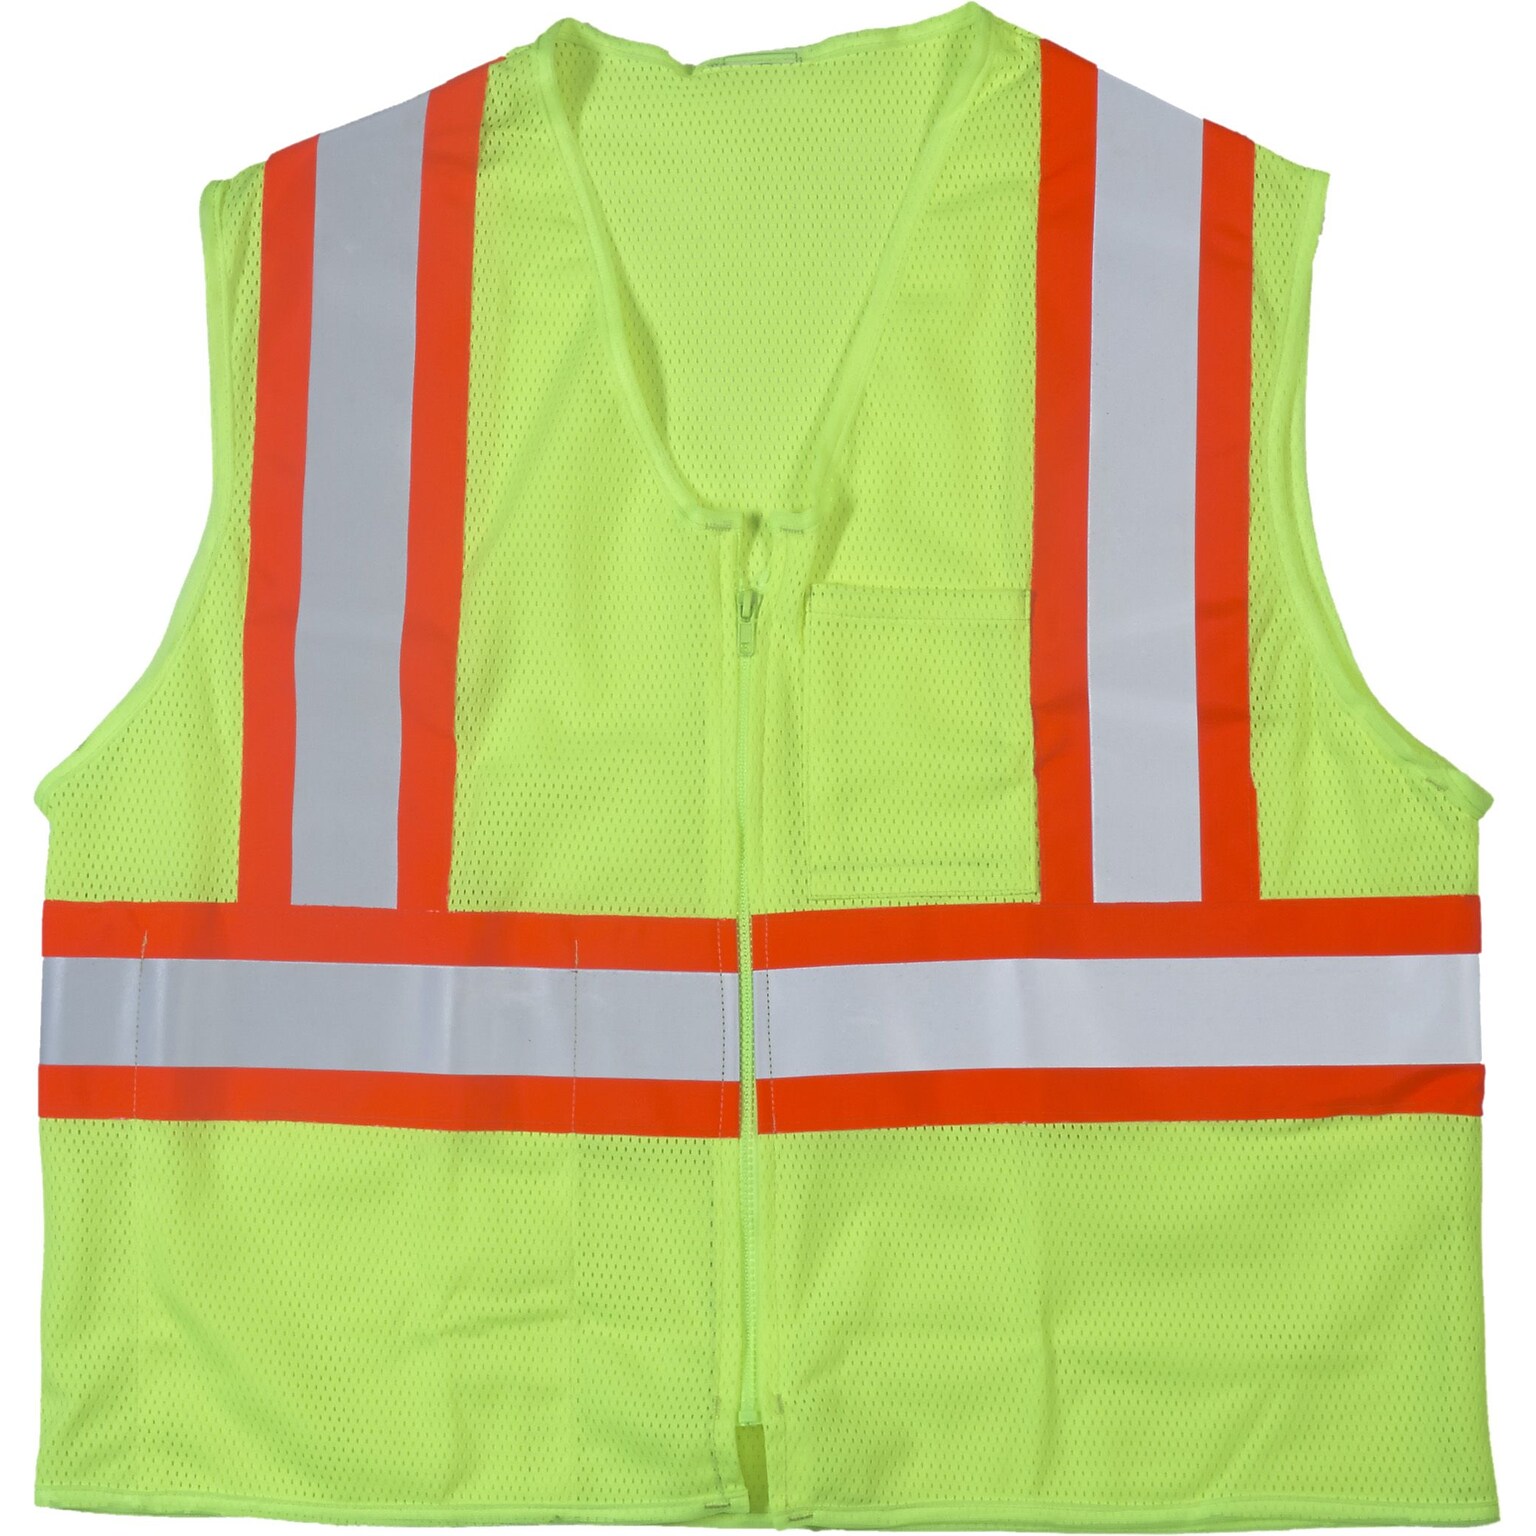 Mutual Industries High Visibility Sleeveless Safety Vest, ANSI Class R2, Lime, Large (16376-0-3)